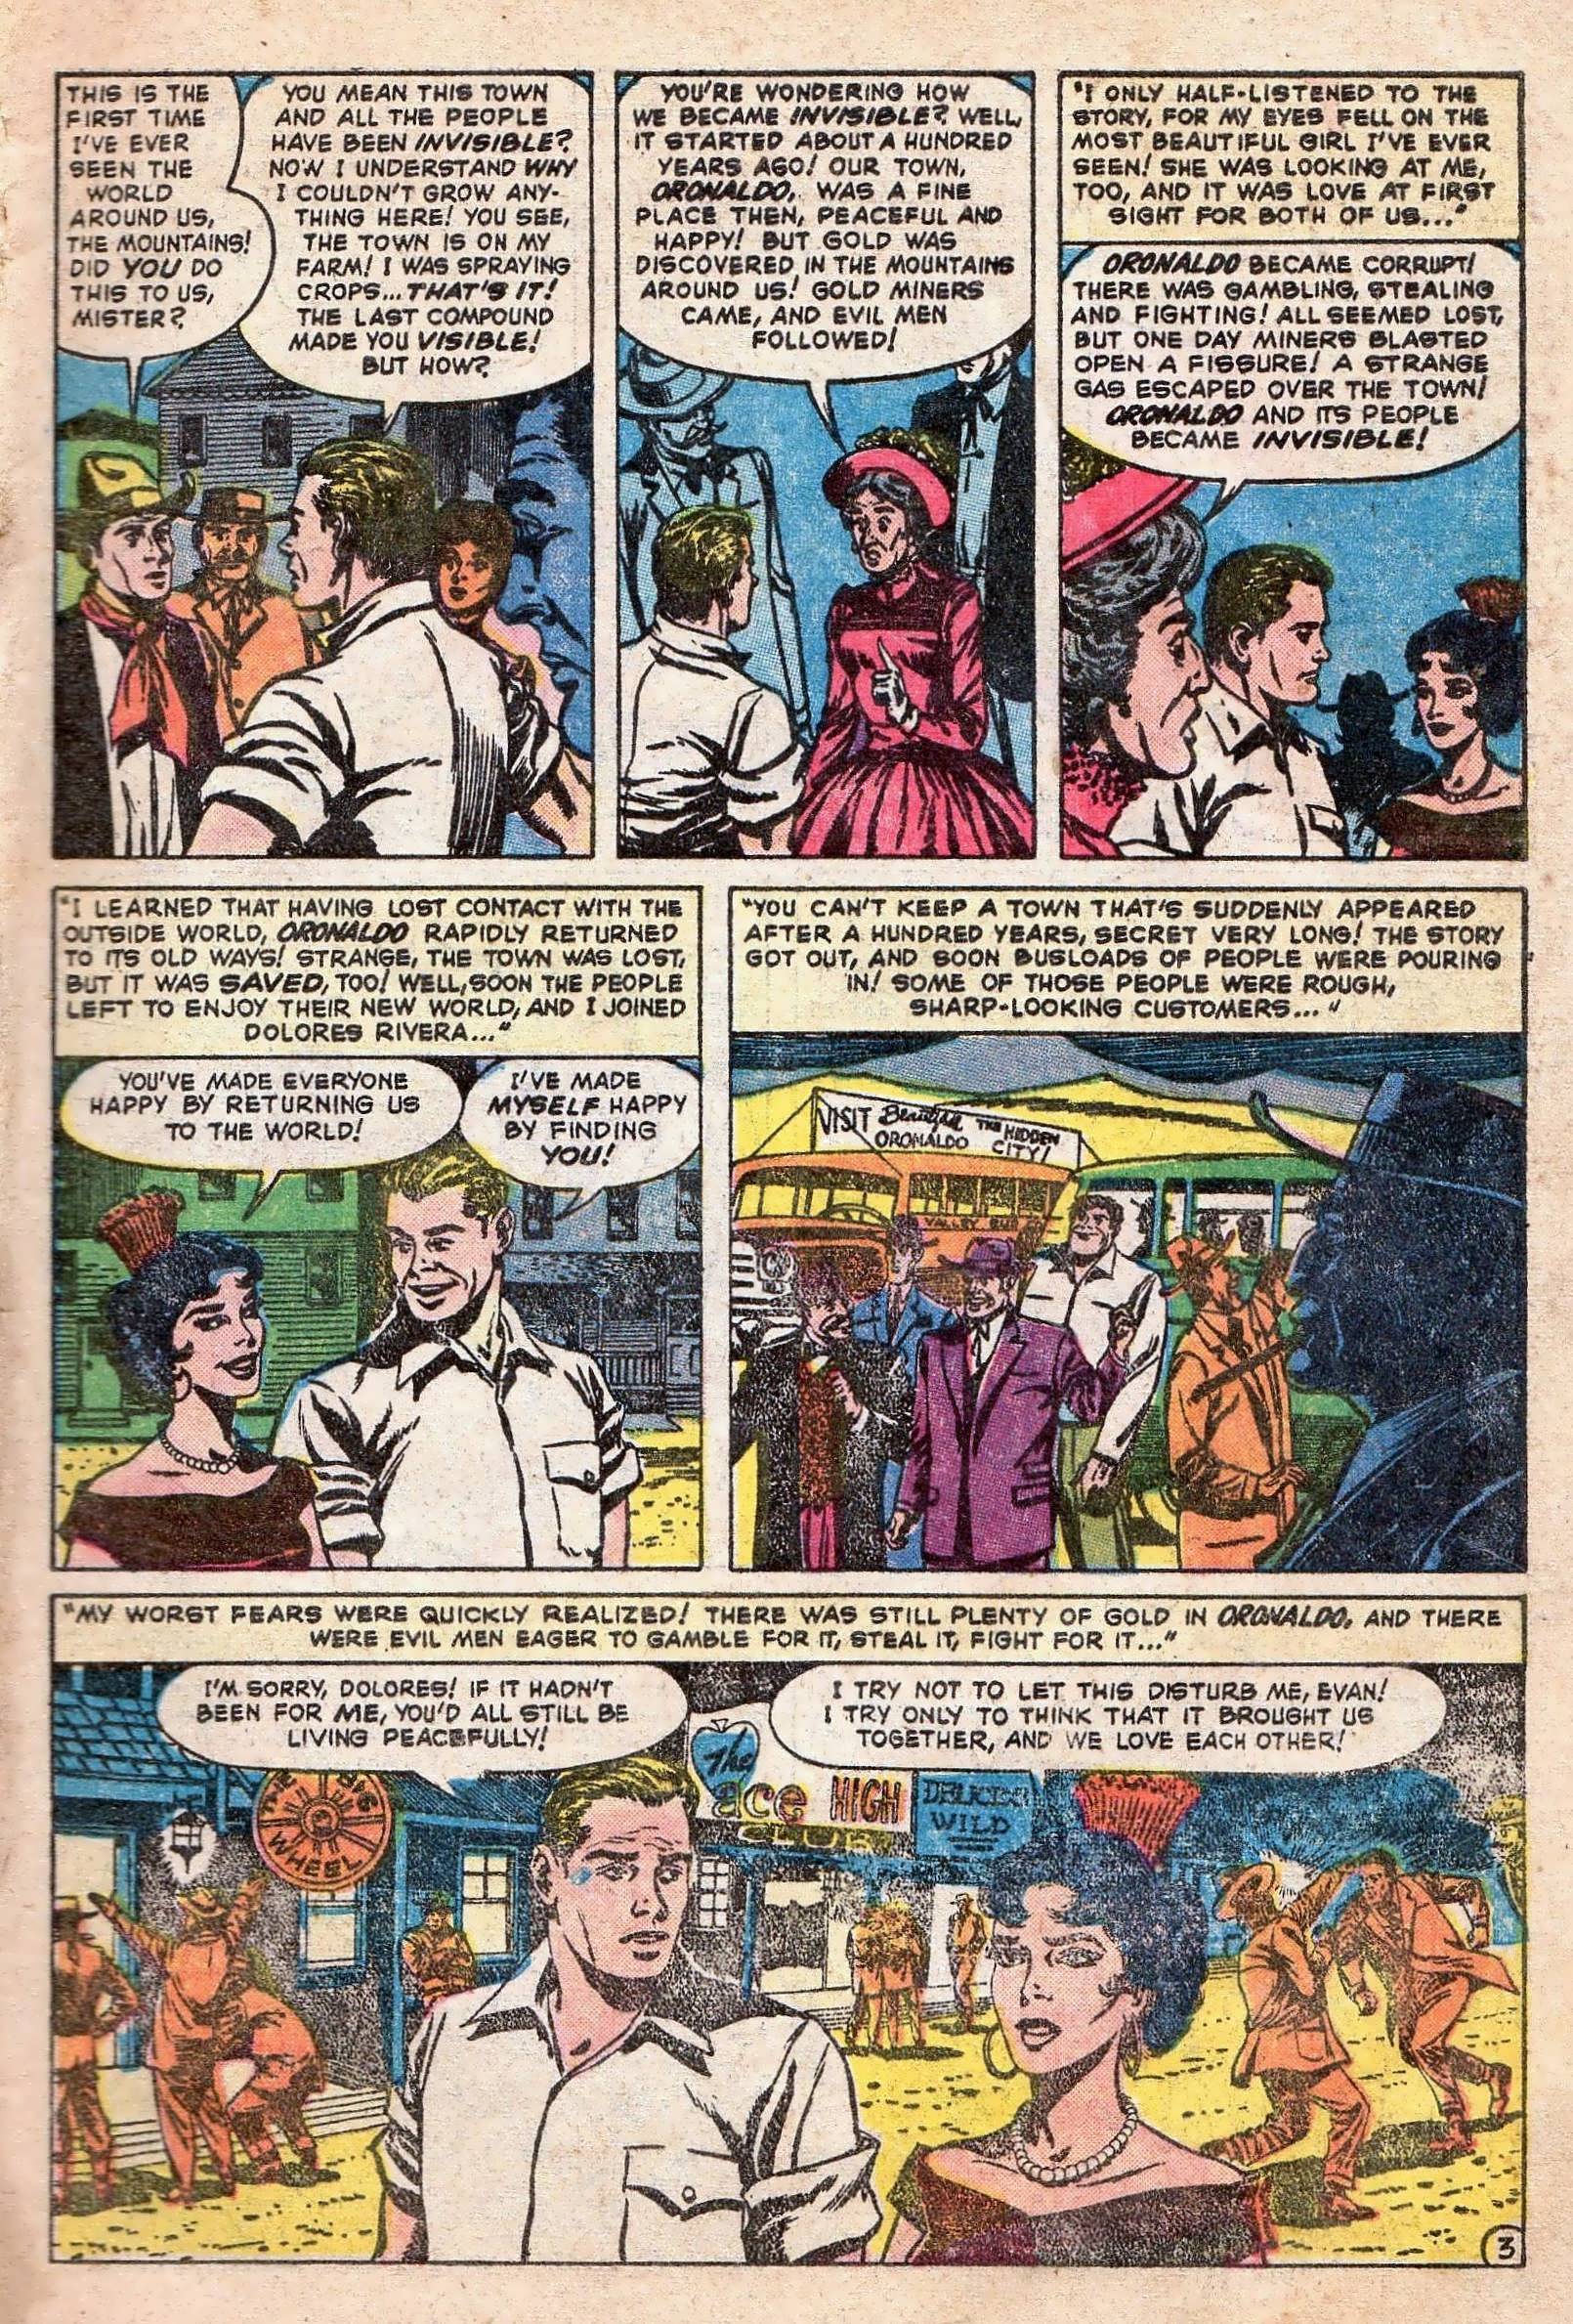 Marvel Tales (1949) 158 Page 4